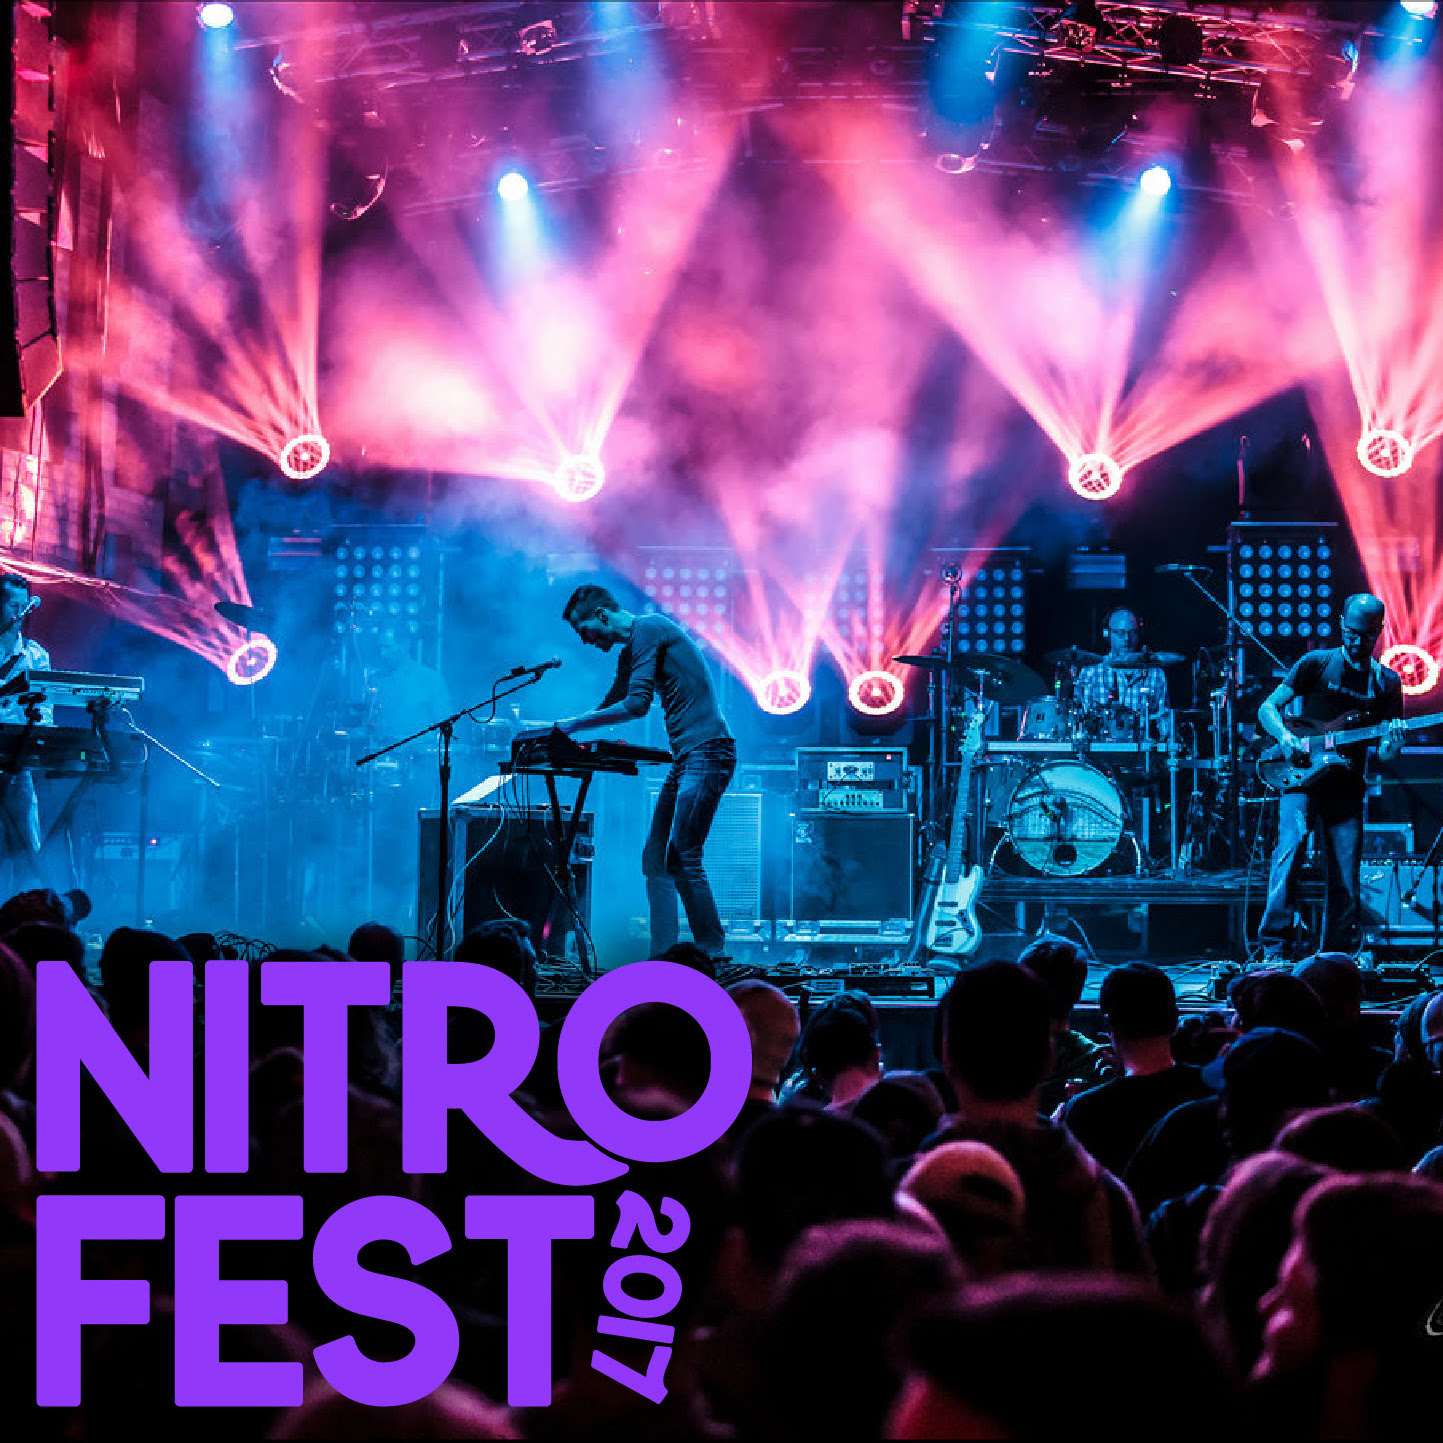 Nitro Fest promotional material. Photo provided.